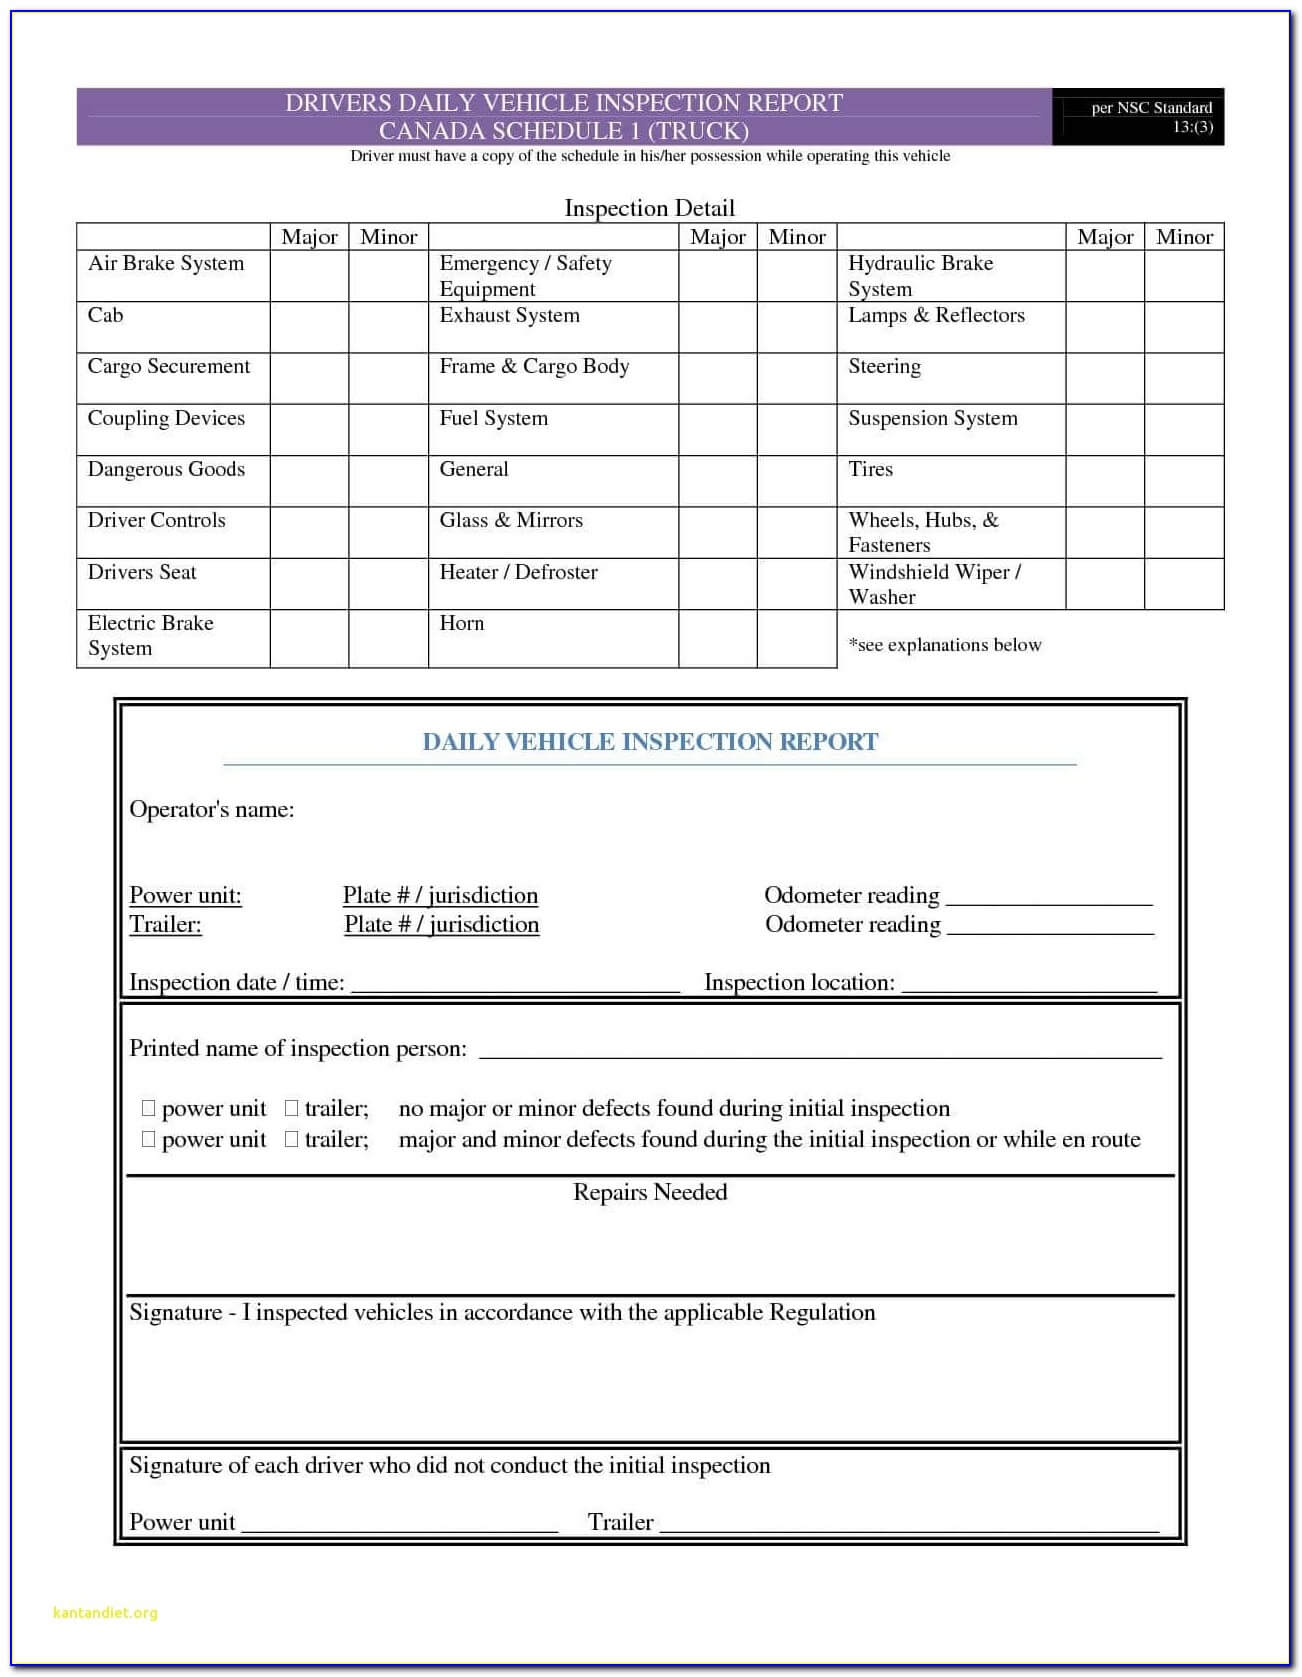 Daily Inspection Report Template New Drivers Daily Vehicle With Part Inspection Report Template